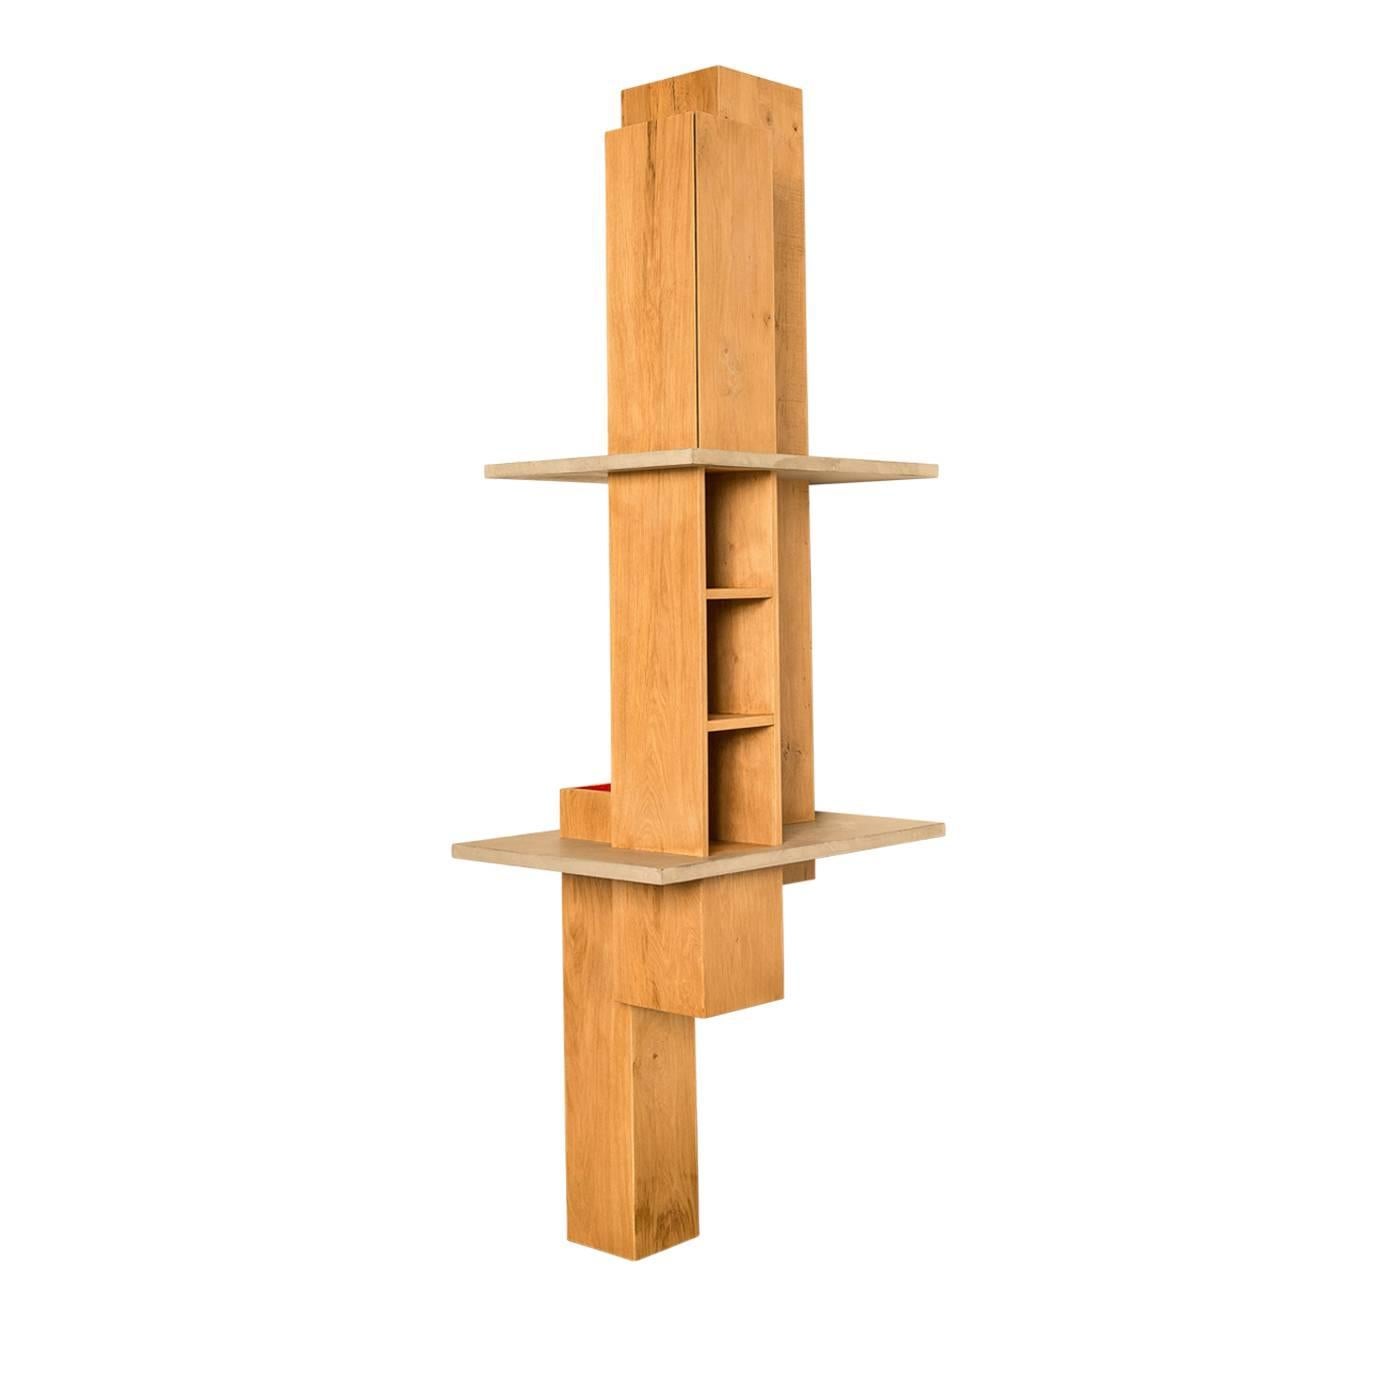 This skilfully crafted oak and concrete bookshelf by Giacomo Moor is made up of three vertical storage compartments which offer shelving as well as a closed cupboard. The top of the smaller beam, which rests on the floor and emerges from the first